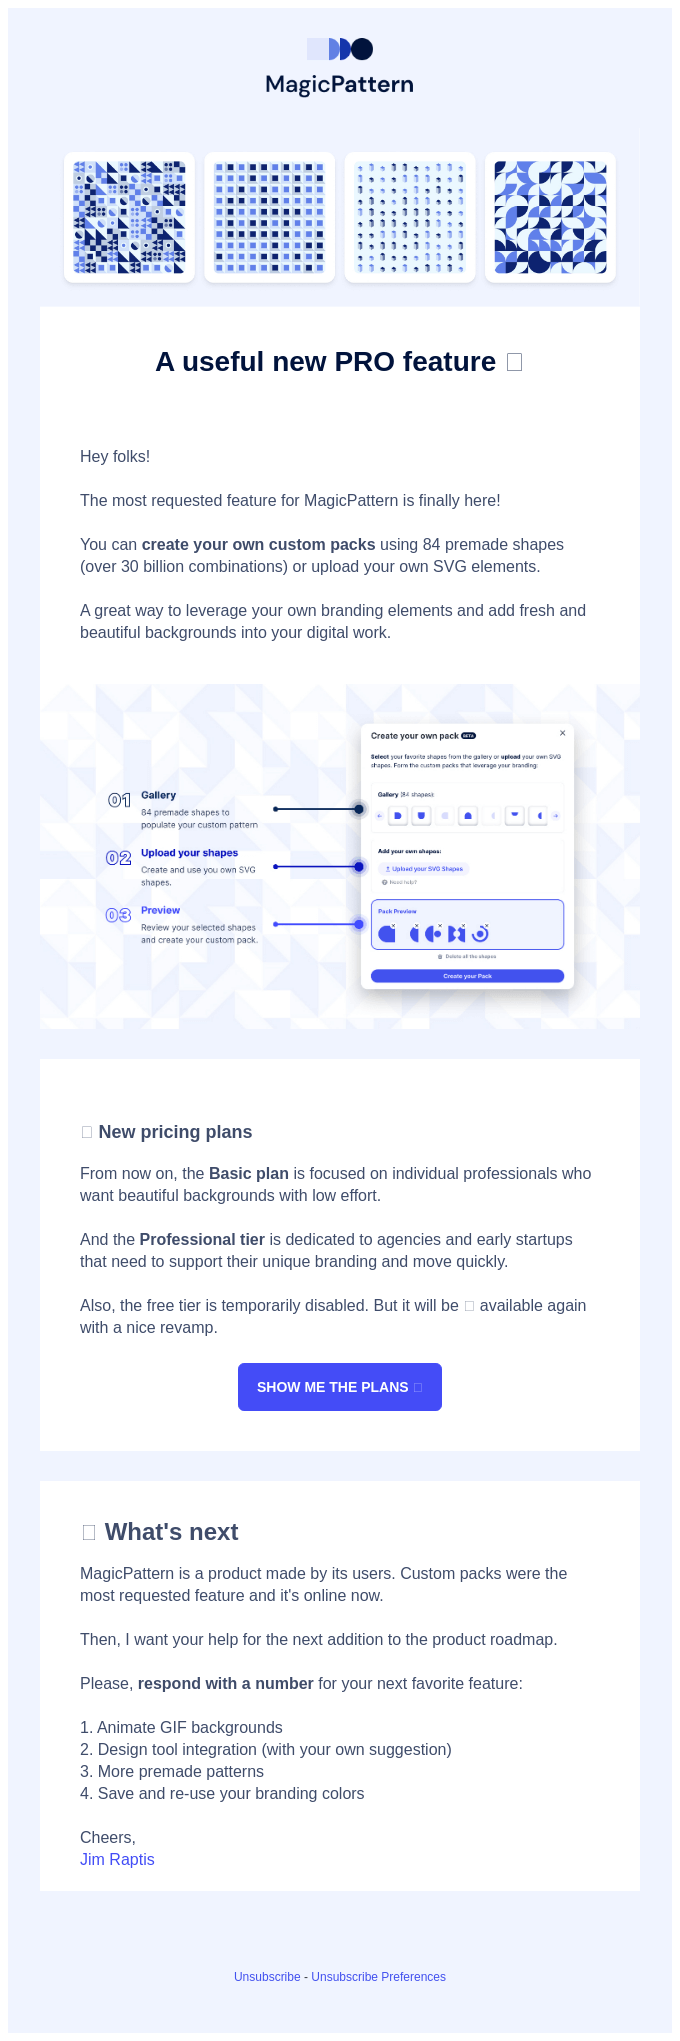 🎉 New feature for MagicPattern